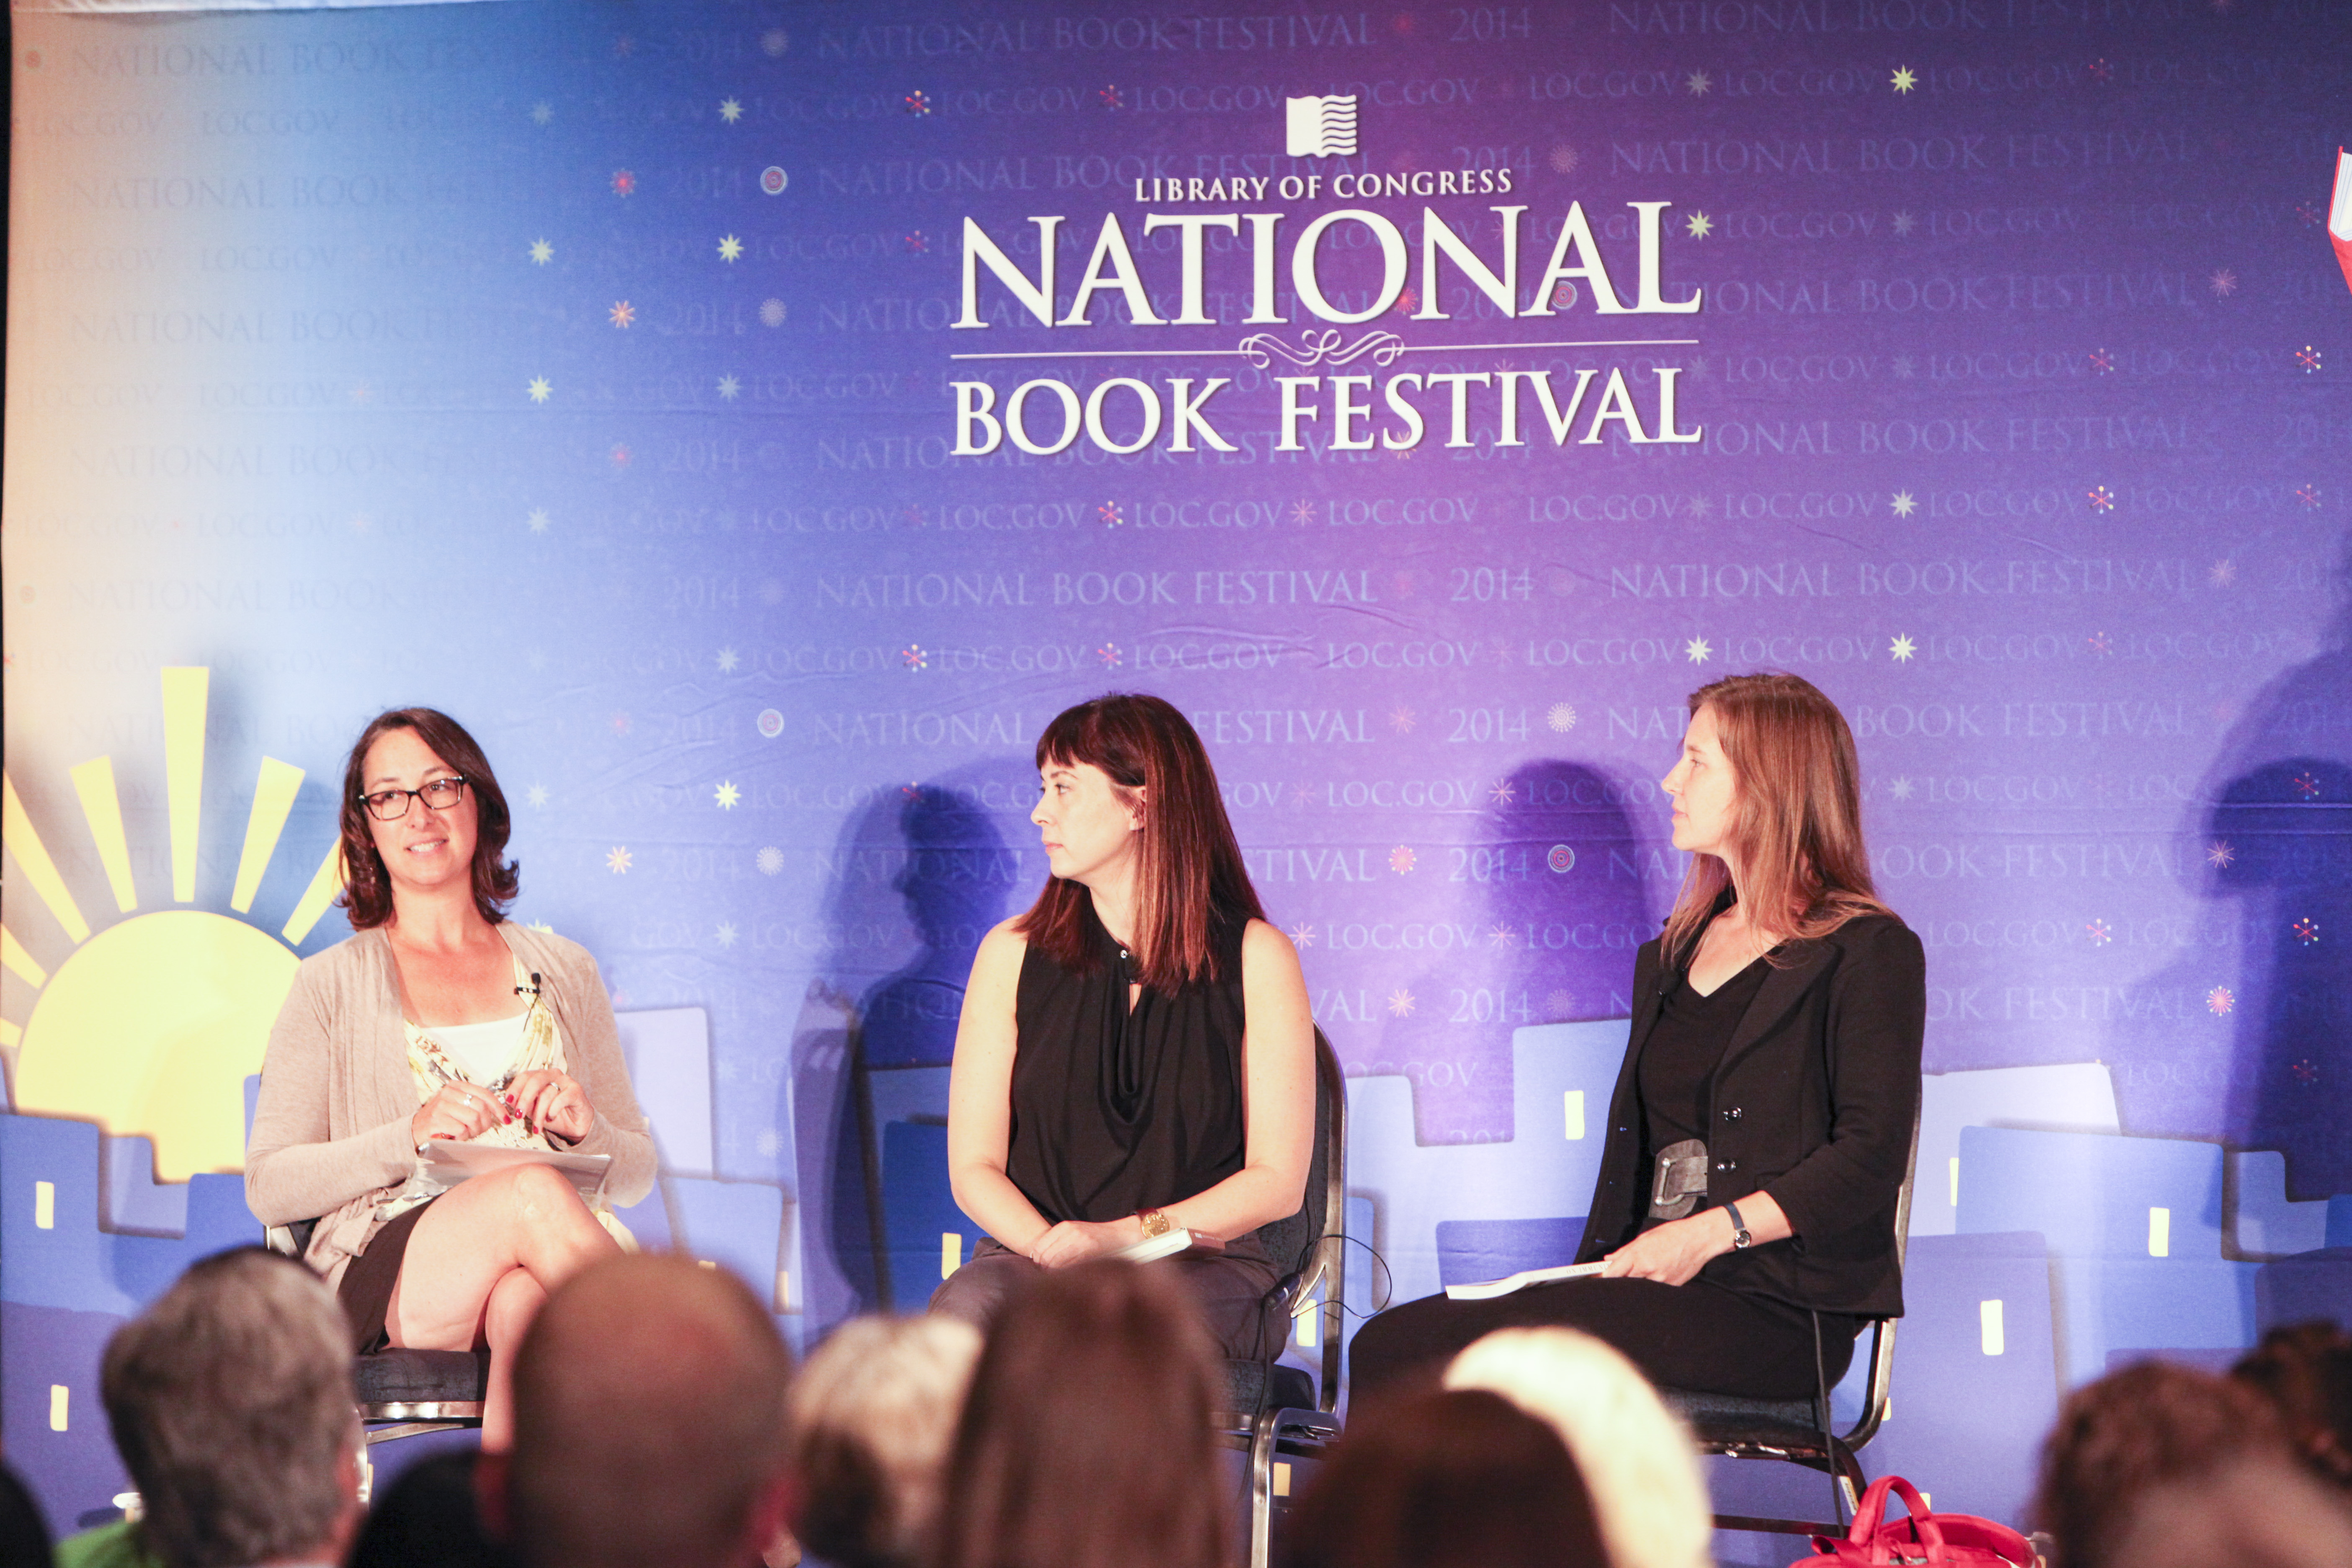 NEA Literature Director on stage with NEA Creative Writing Fellows Paisley Redkal and Eula Biss.